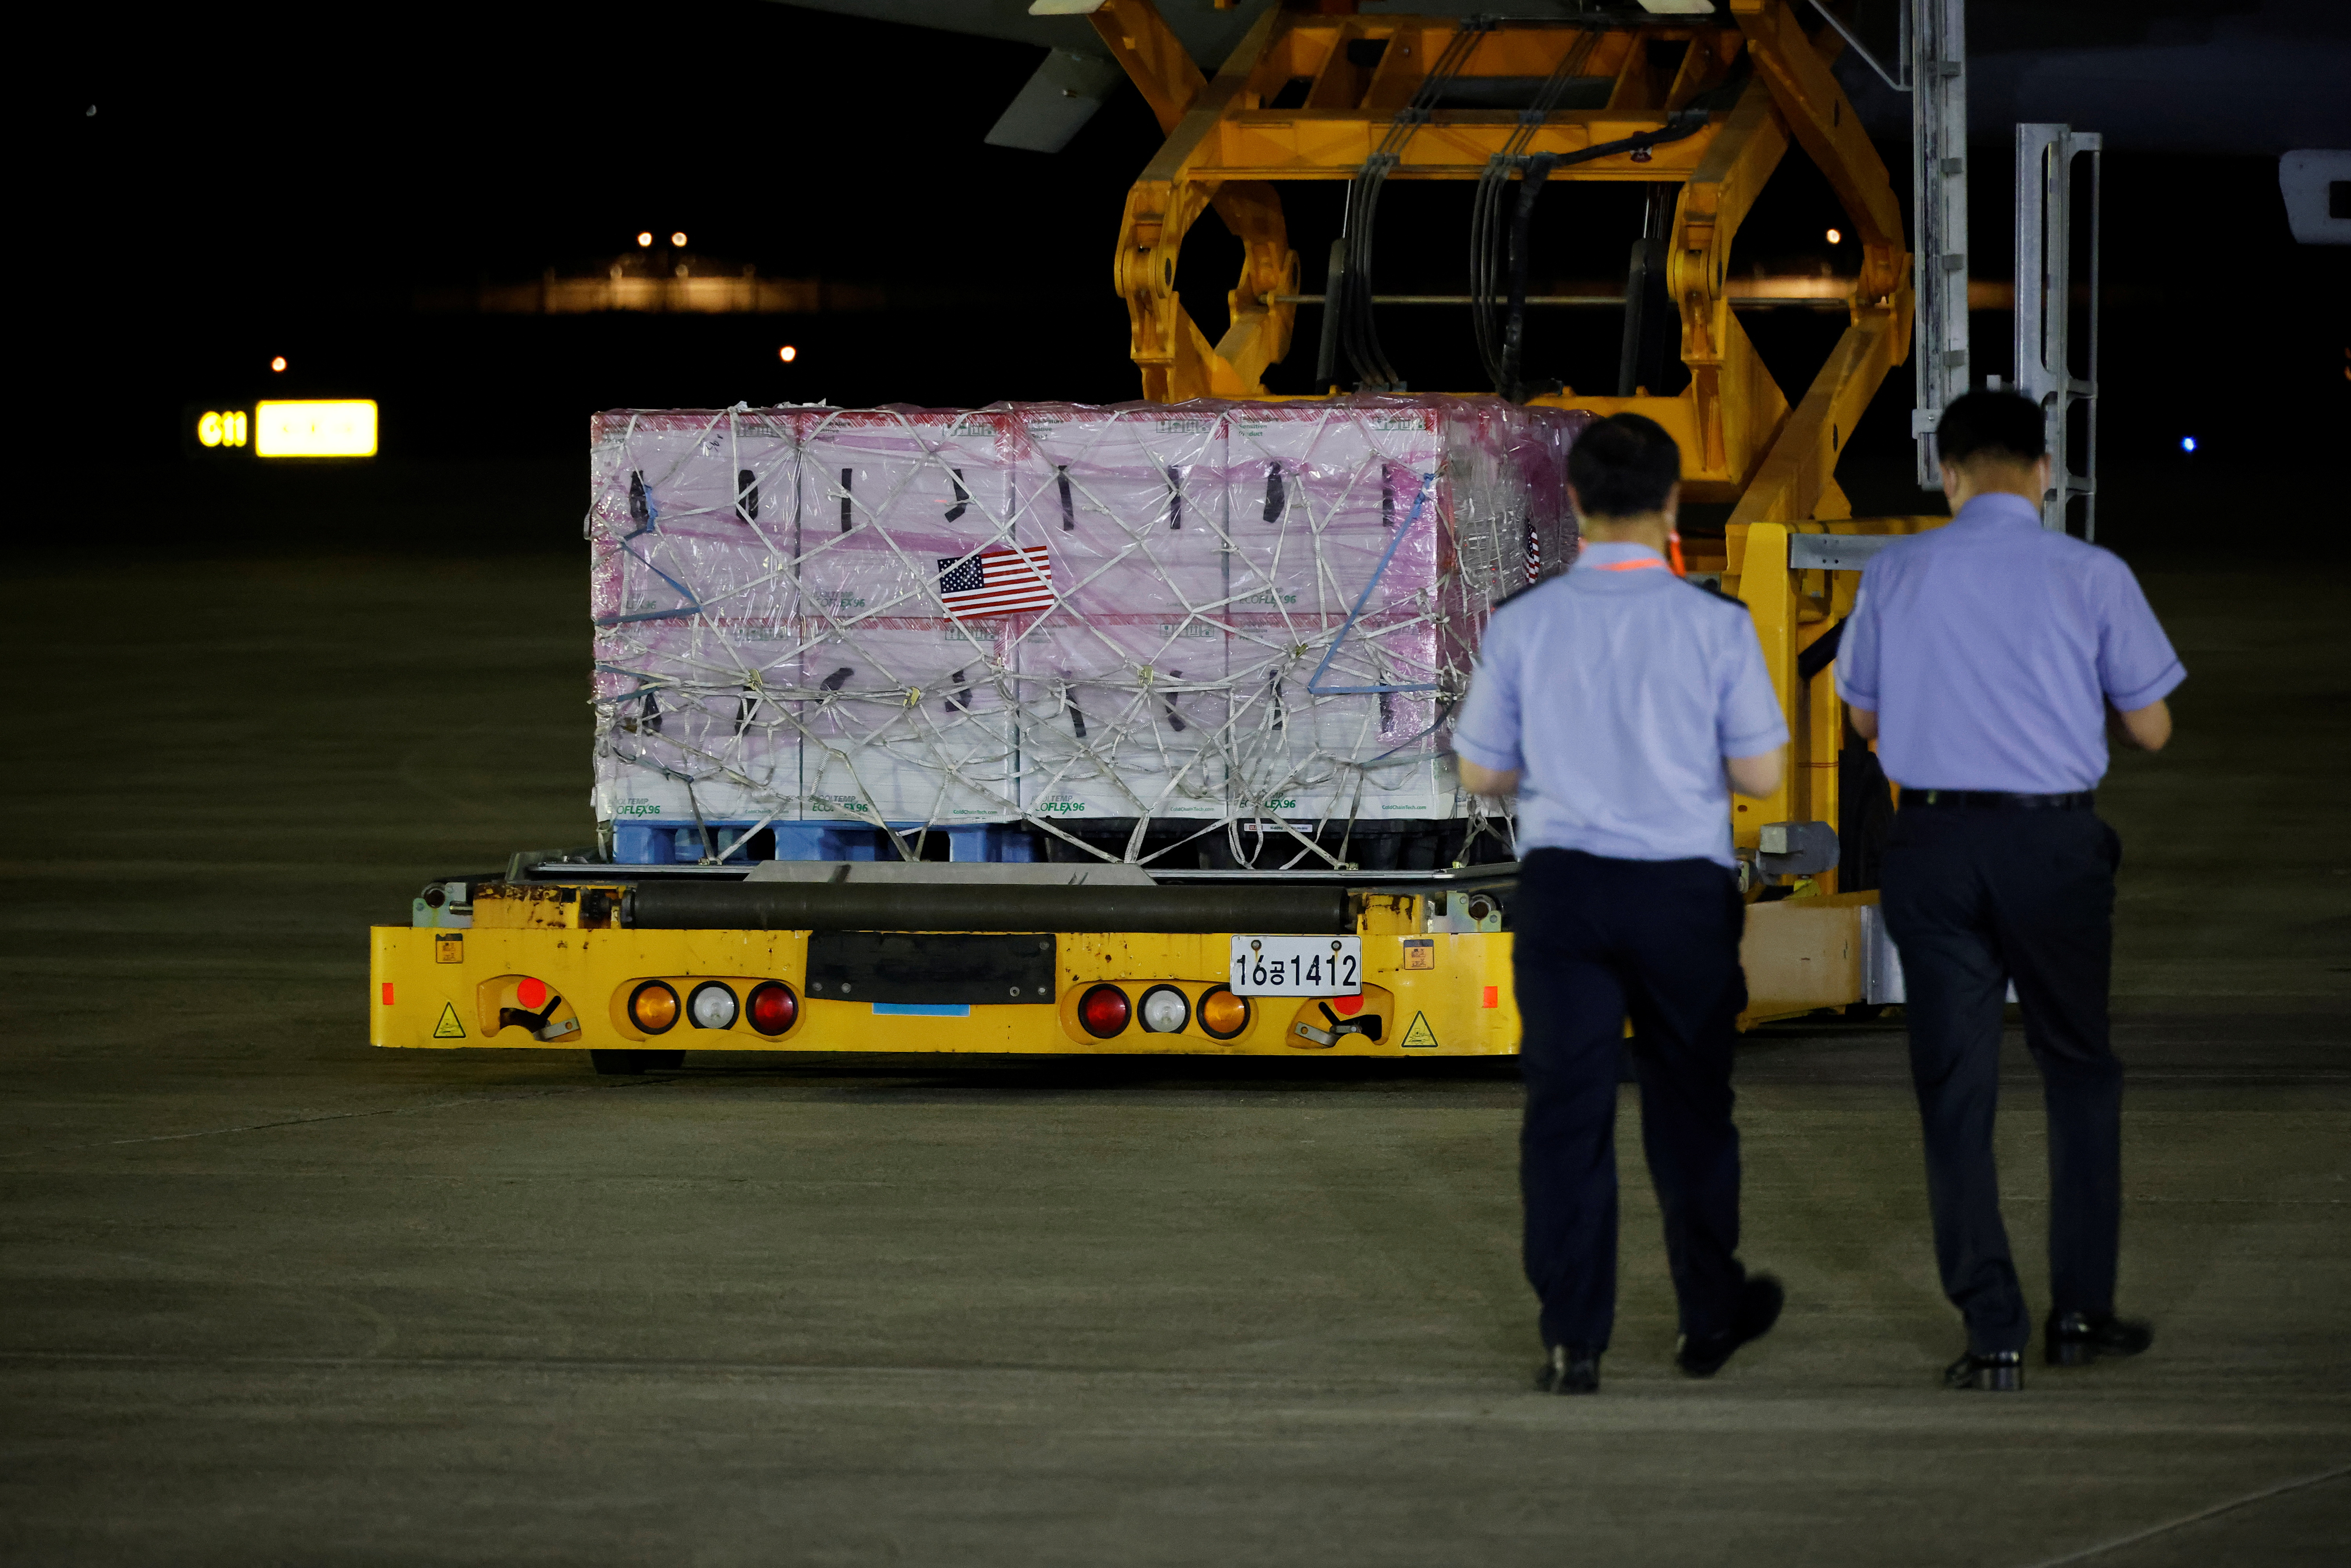 A batch of Johnson & Johnson's Janssen COVID-19 vaccines arrives at a military airport in Seongnam